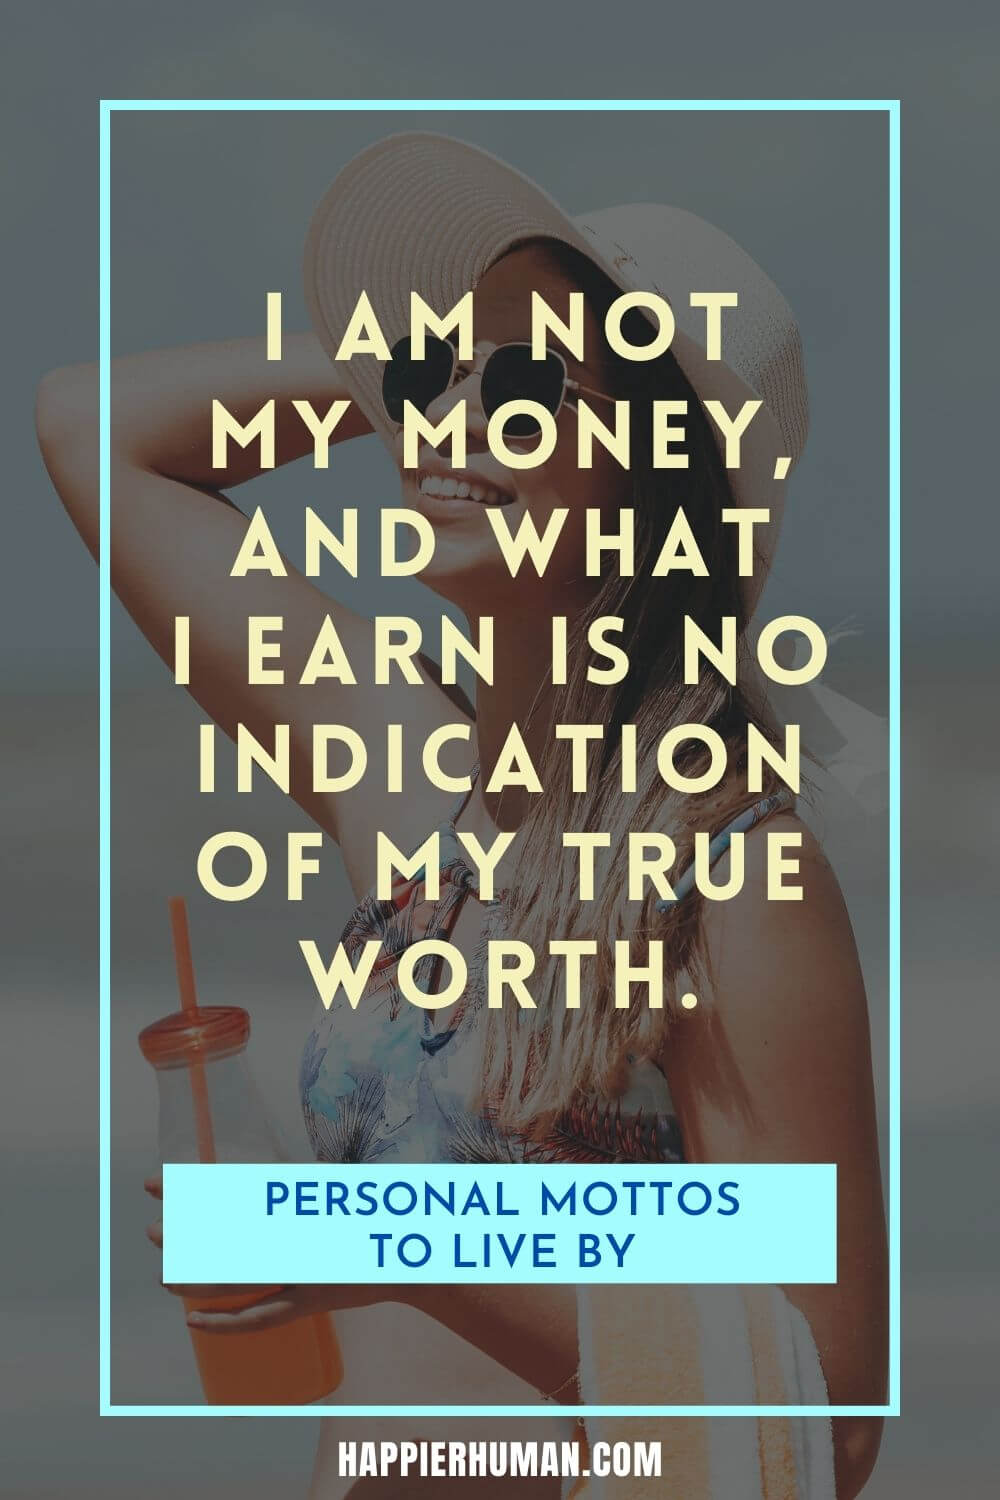 Personal Motto - I am not my money, and what I earn is no indication of my true worth. | motto in life as a student | motto in life example | motto in life with explanation